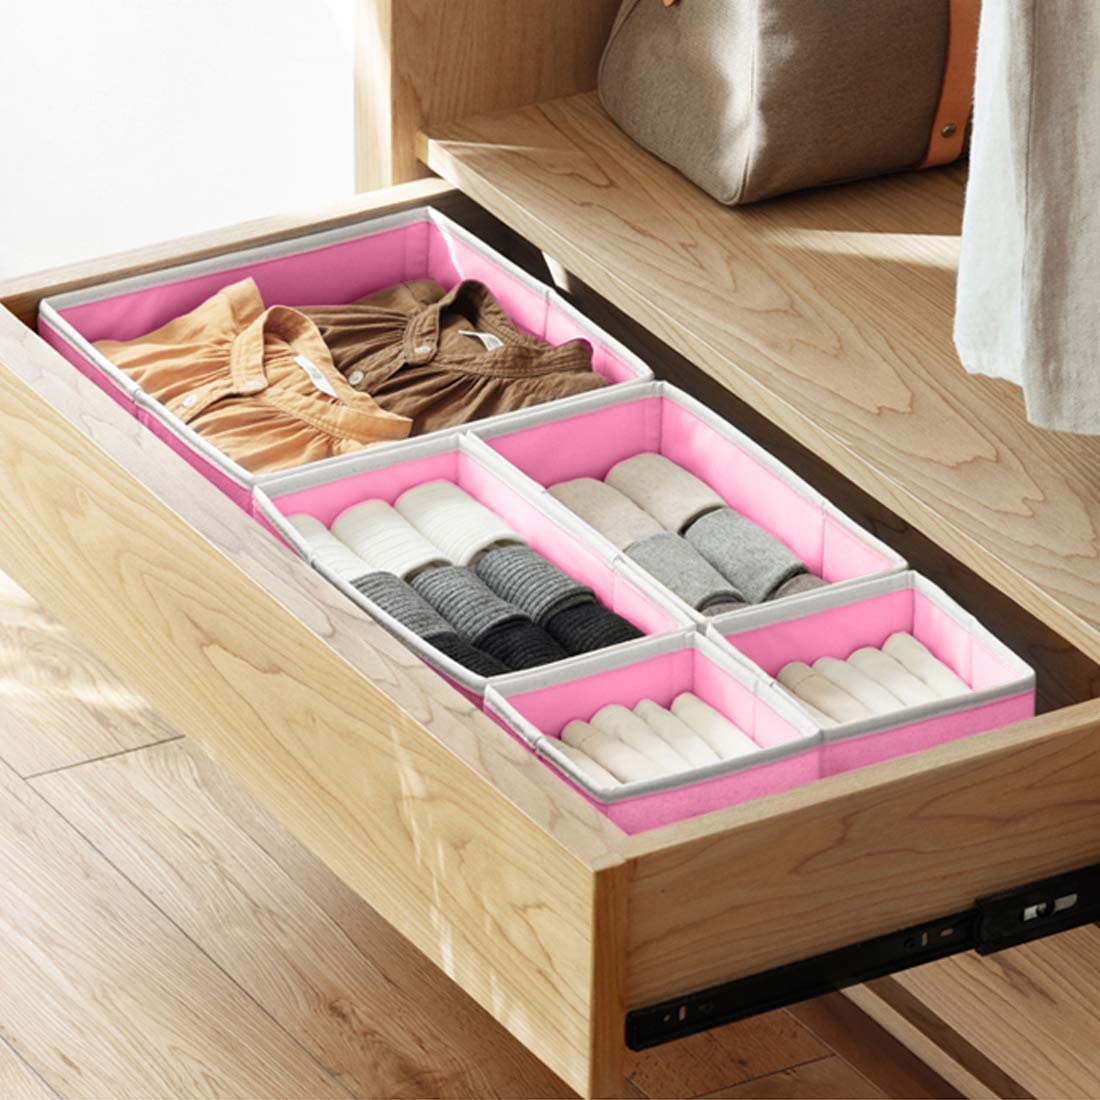 12 Pack Foldable Drawer Organizers Pink (50OFF) Product Testing Group